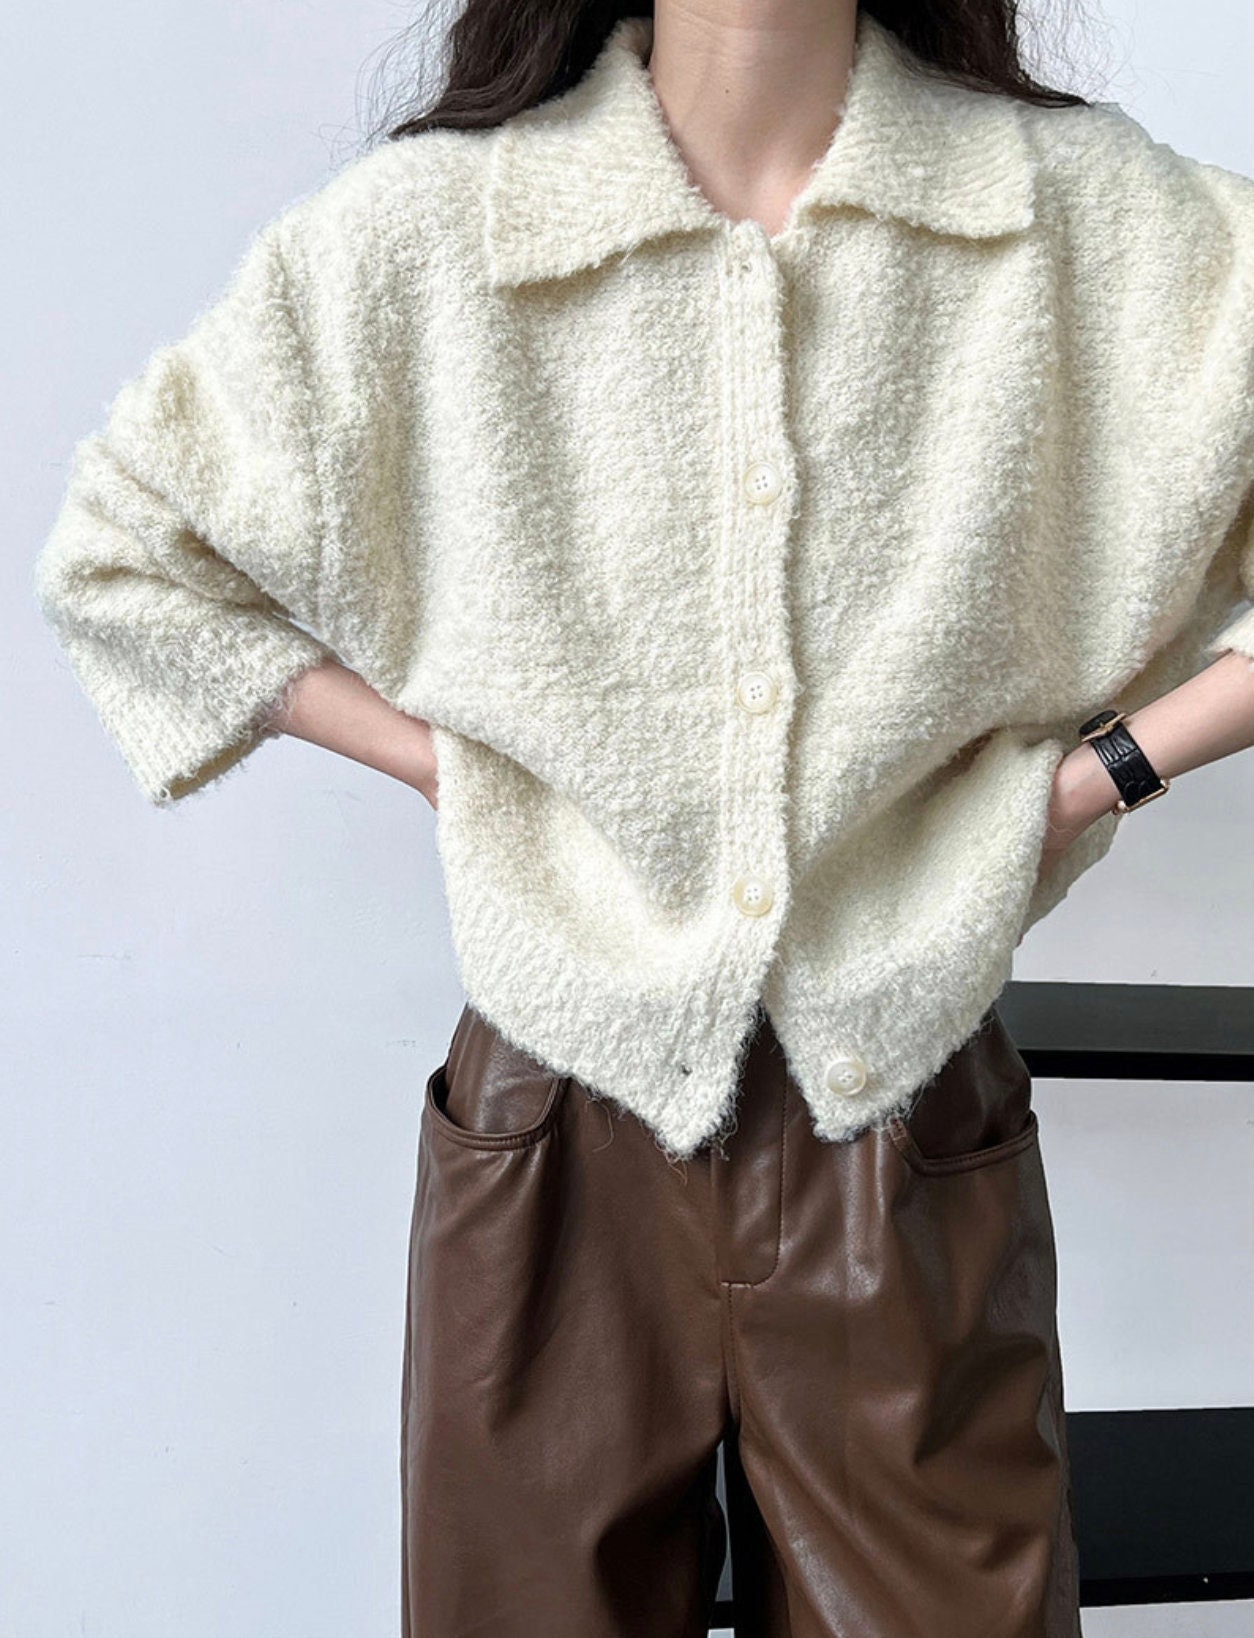 Cozy Knit Sweater / Loose Fit Cardigans / Knits for Women / 